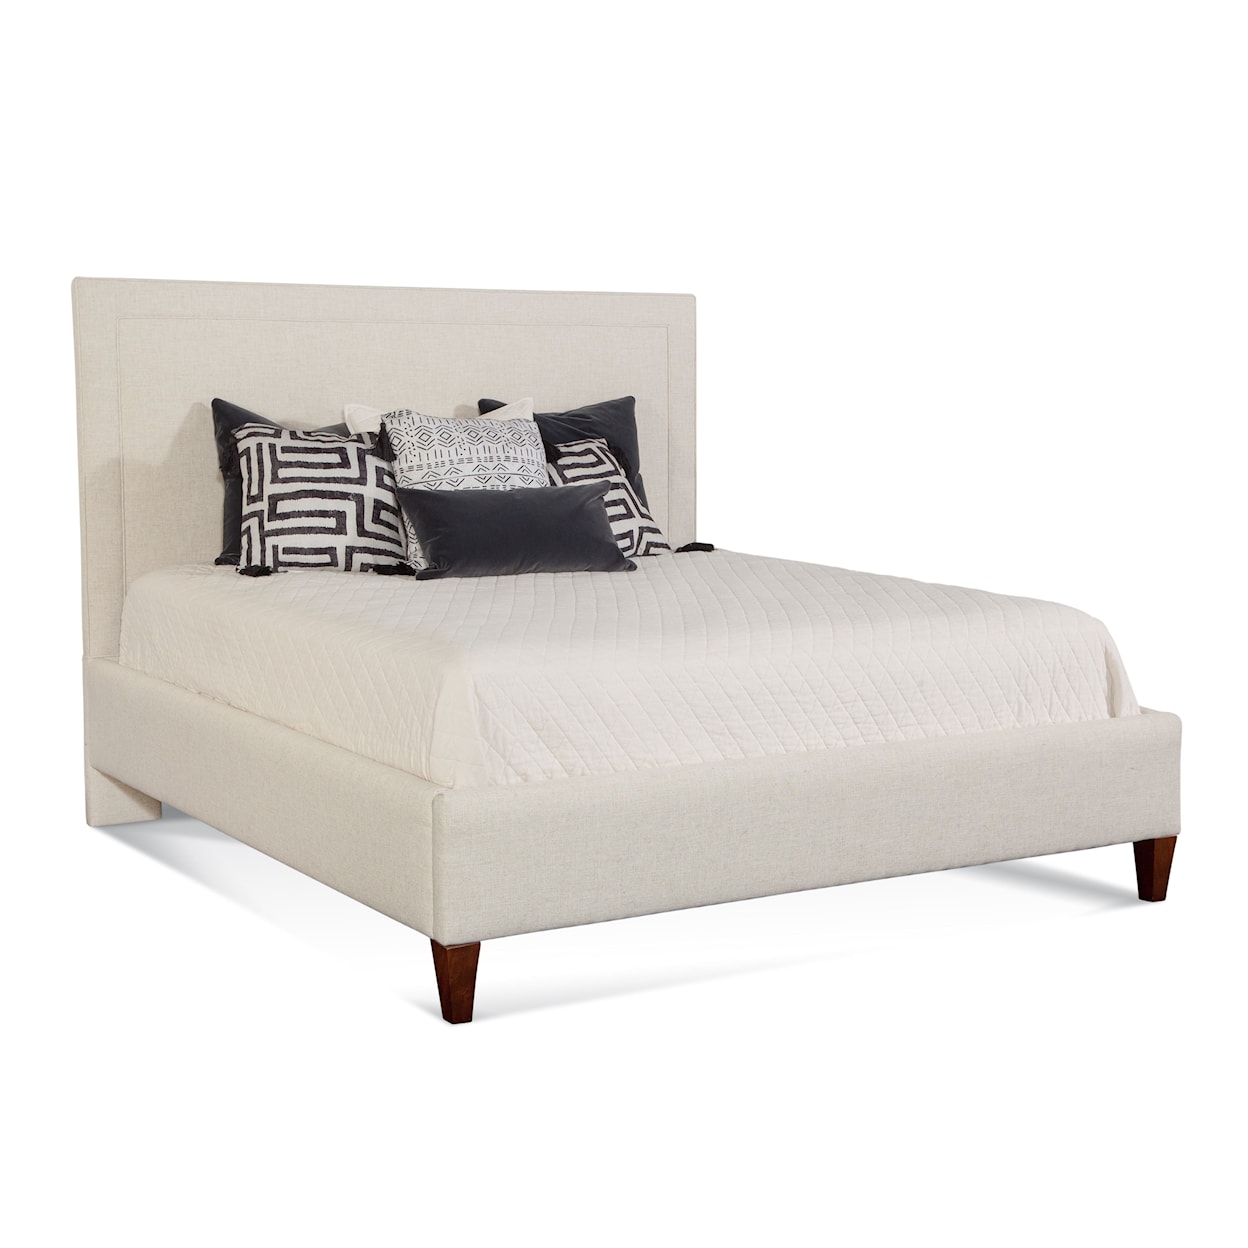 Braxton Culler Emory King Bed